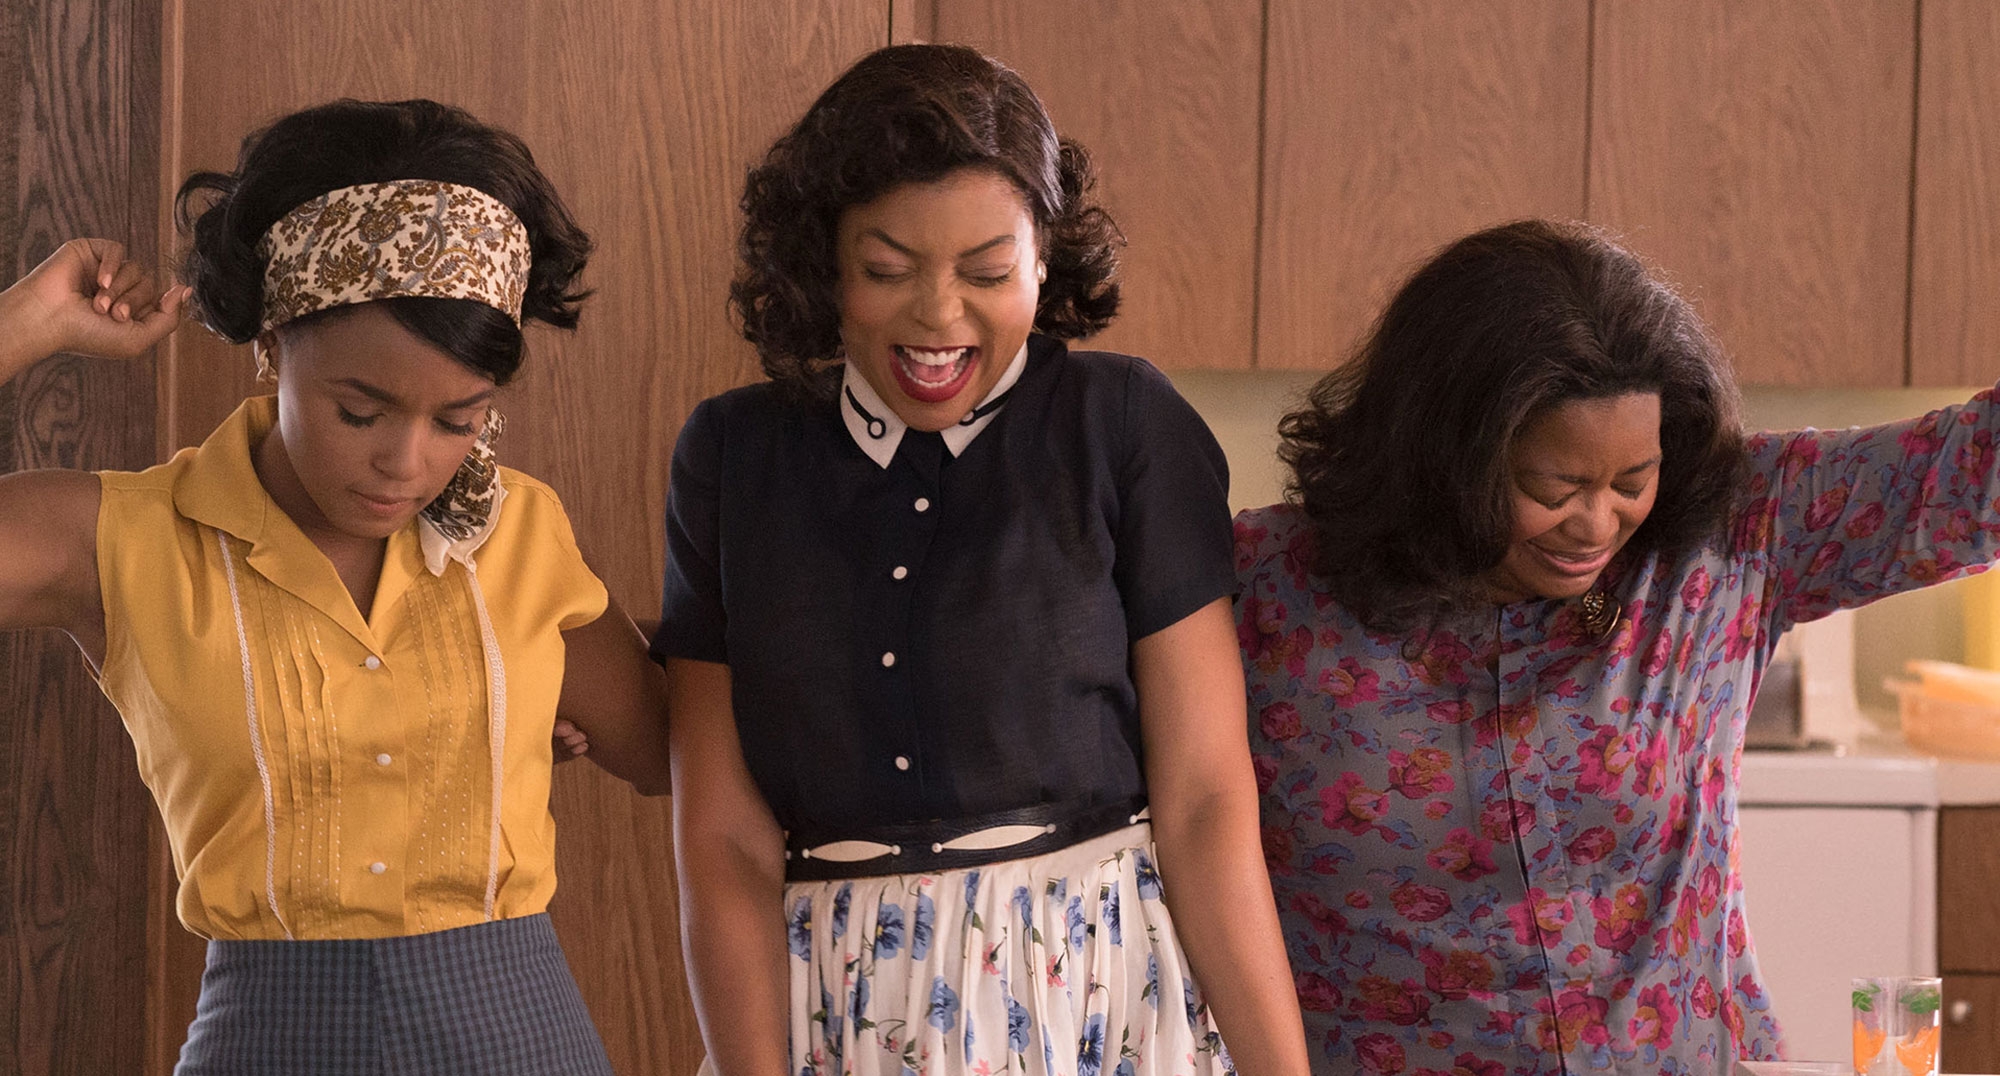 Hidden Figures Review: a little known story rockets to becoming a must-see film